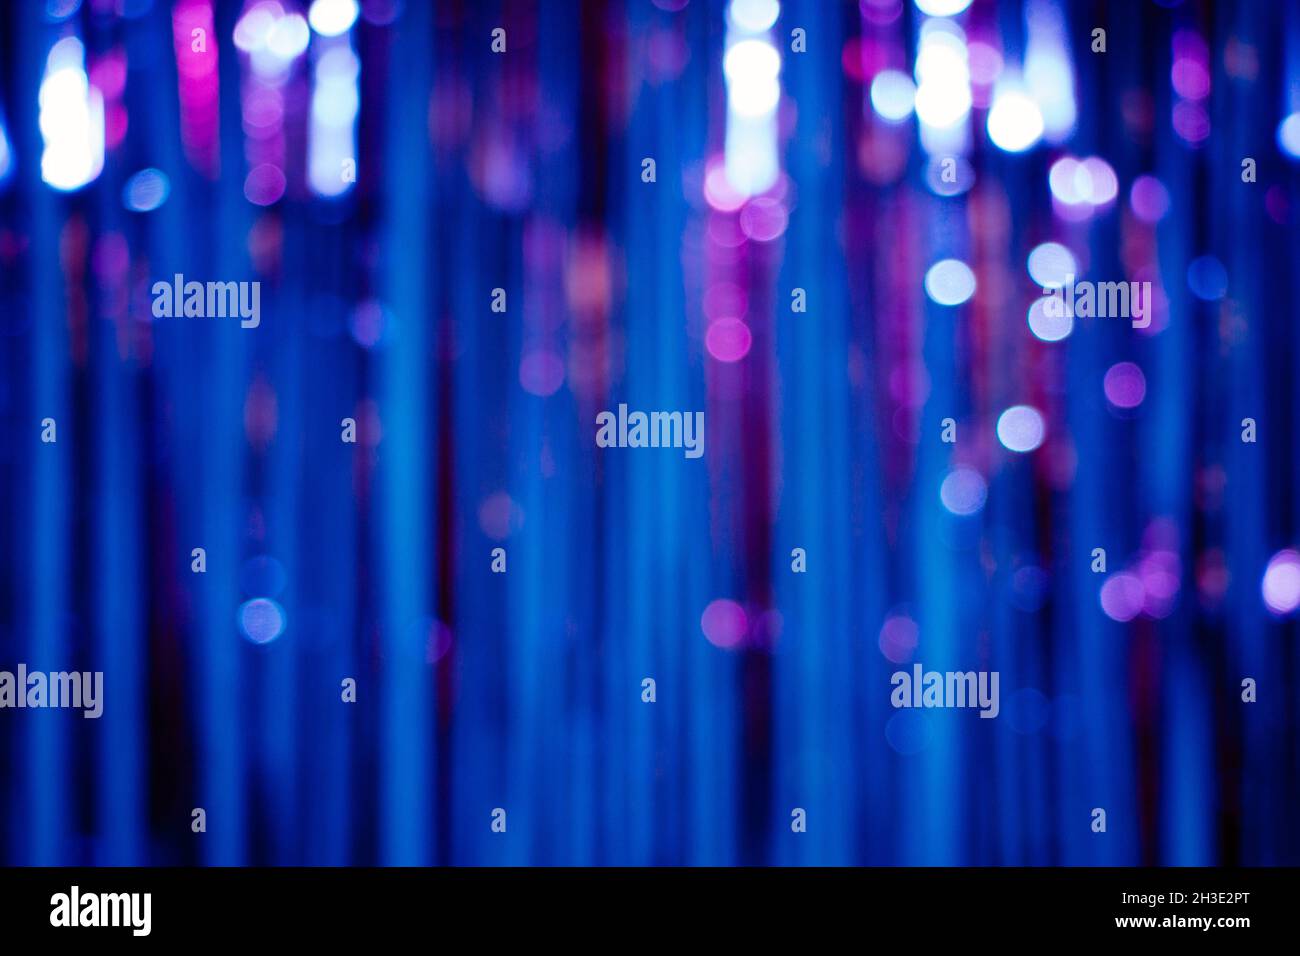 Abstract background with stripes and lights bookeh in blue and purple colors made of a glitter curtain Stock Photo